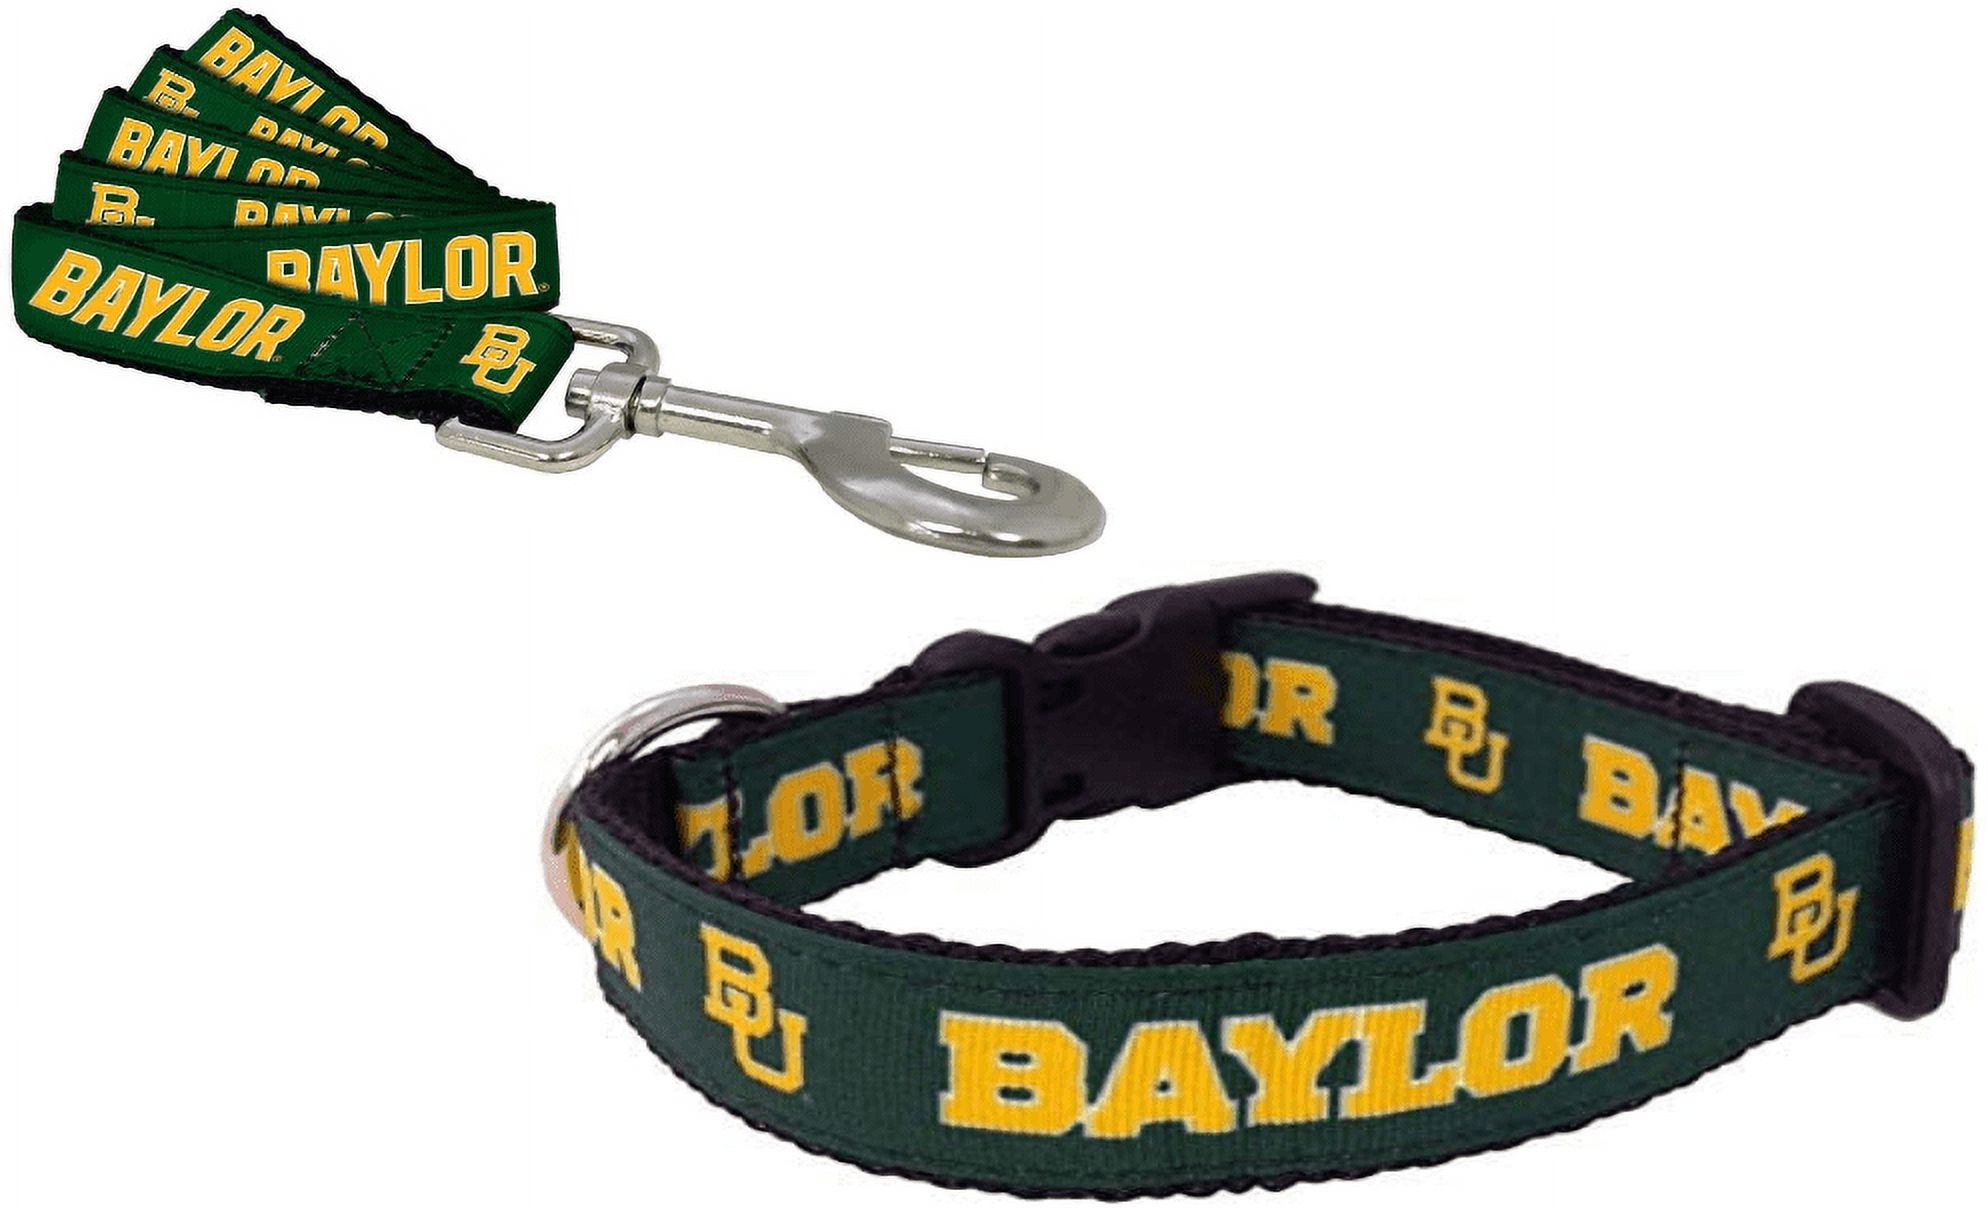 Brand New Baylor Small Pet Dog Collar(1 Inch Wide, 8-14 Inch Long), and Small Leash(5/8 Inch Wide, 6 Feet Long) Bundle, Official Bears Logo/Colors - image 1 of 3